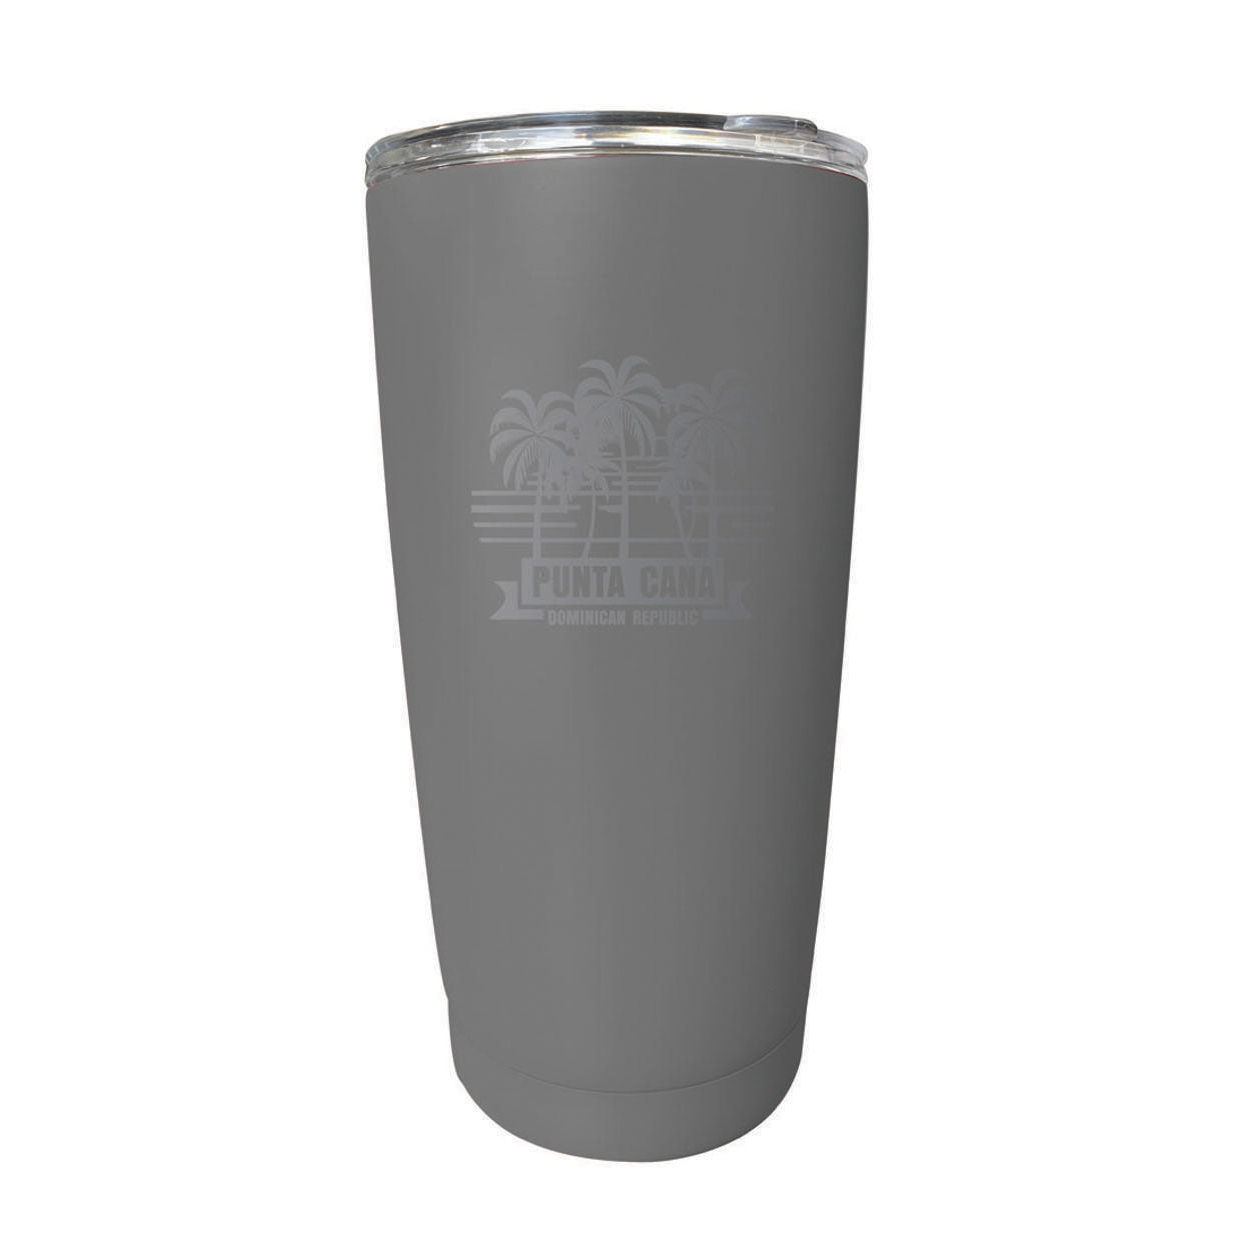 Punta Cana Dominican Republic Souvenir 16 Oz Stainless Steel Insulated Tumbler Etched - Gray, PALM BEACH